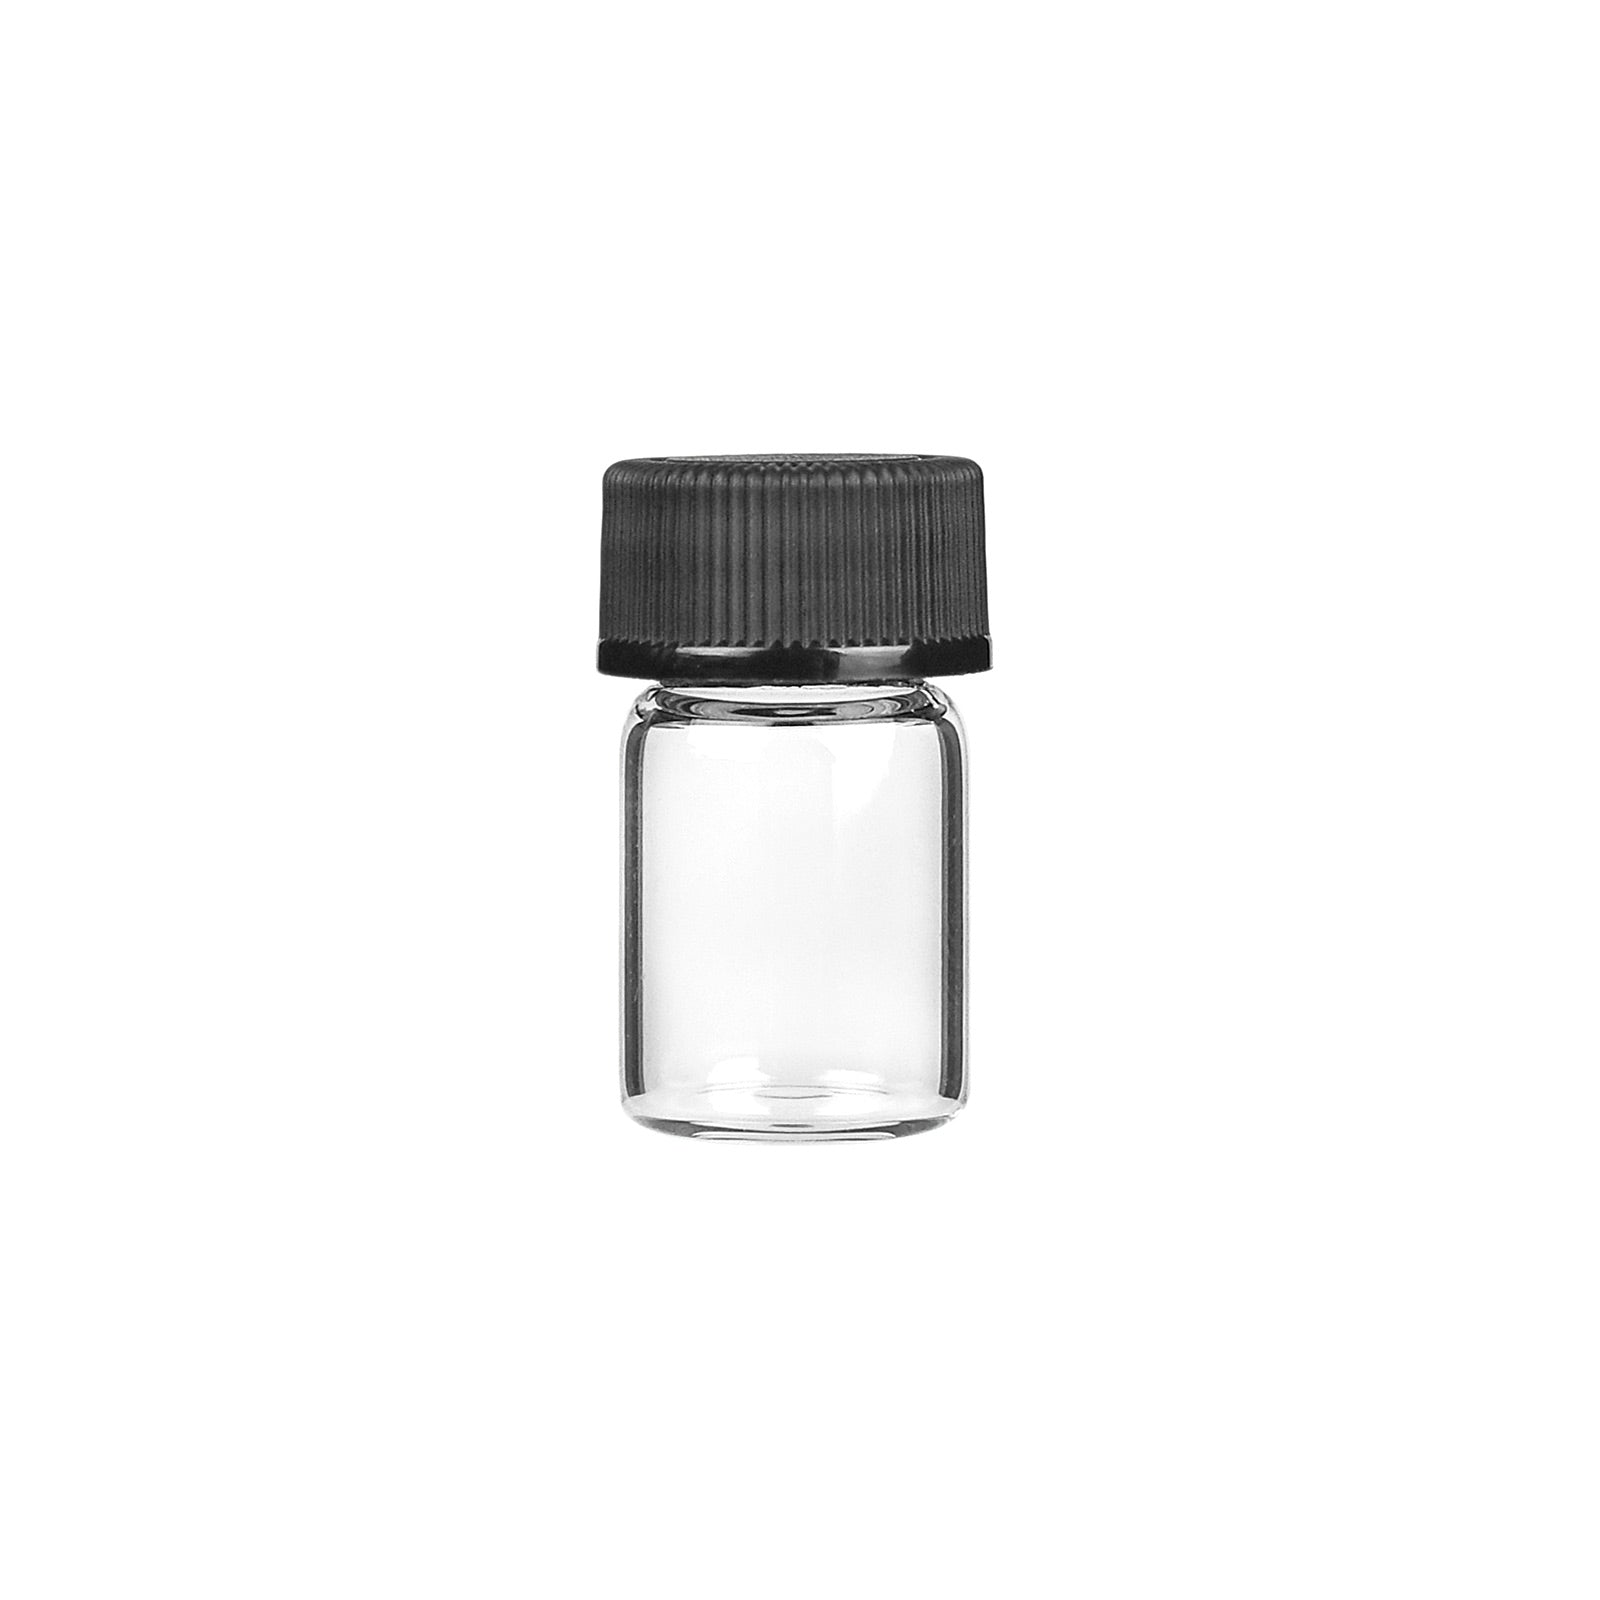 2ml Glass Oil Concentrate Container - 144 Count